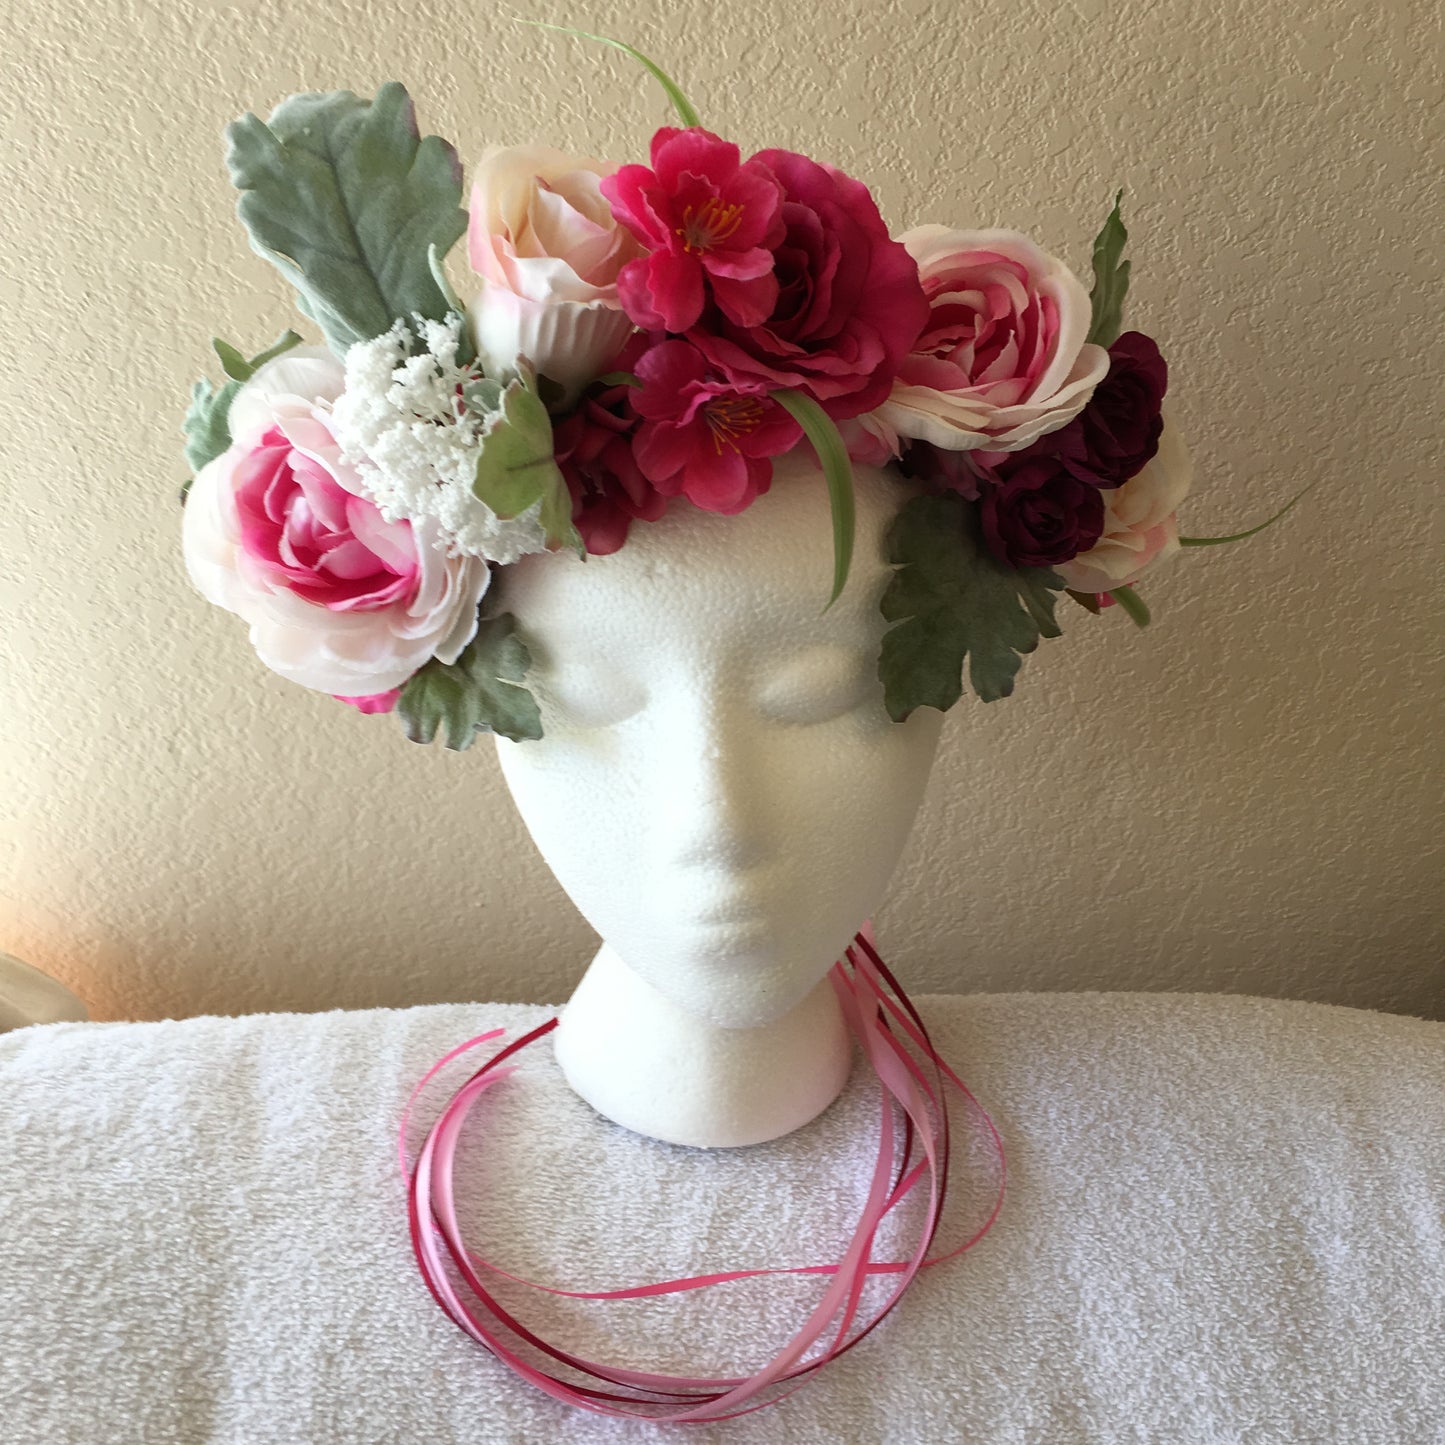 Large Wreath - Pinks & white flowers